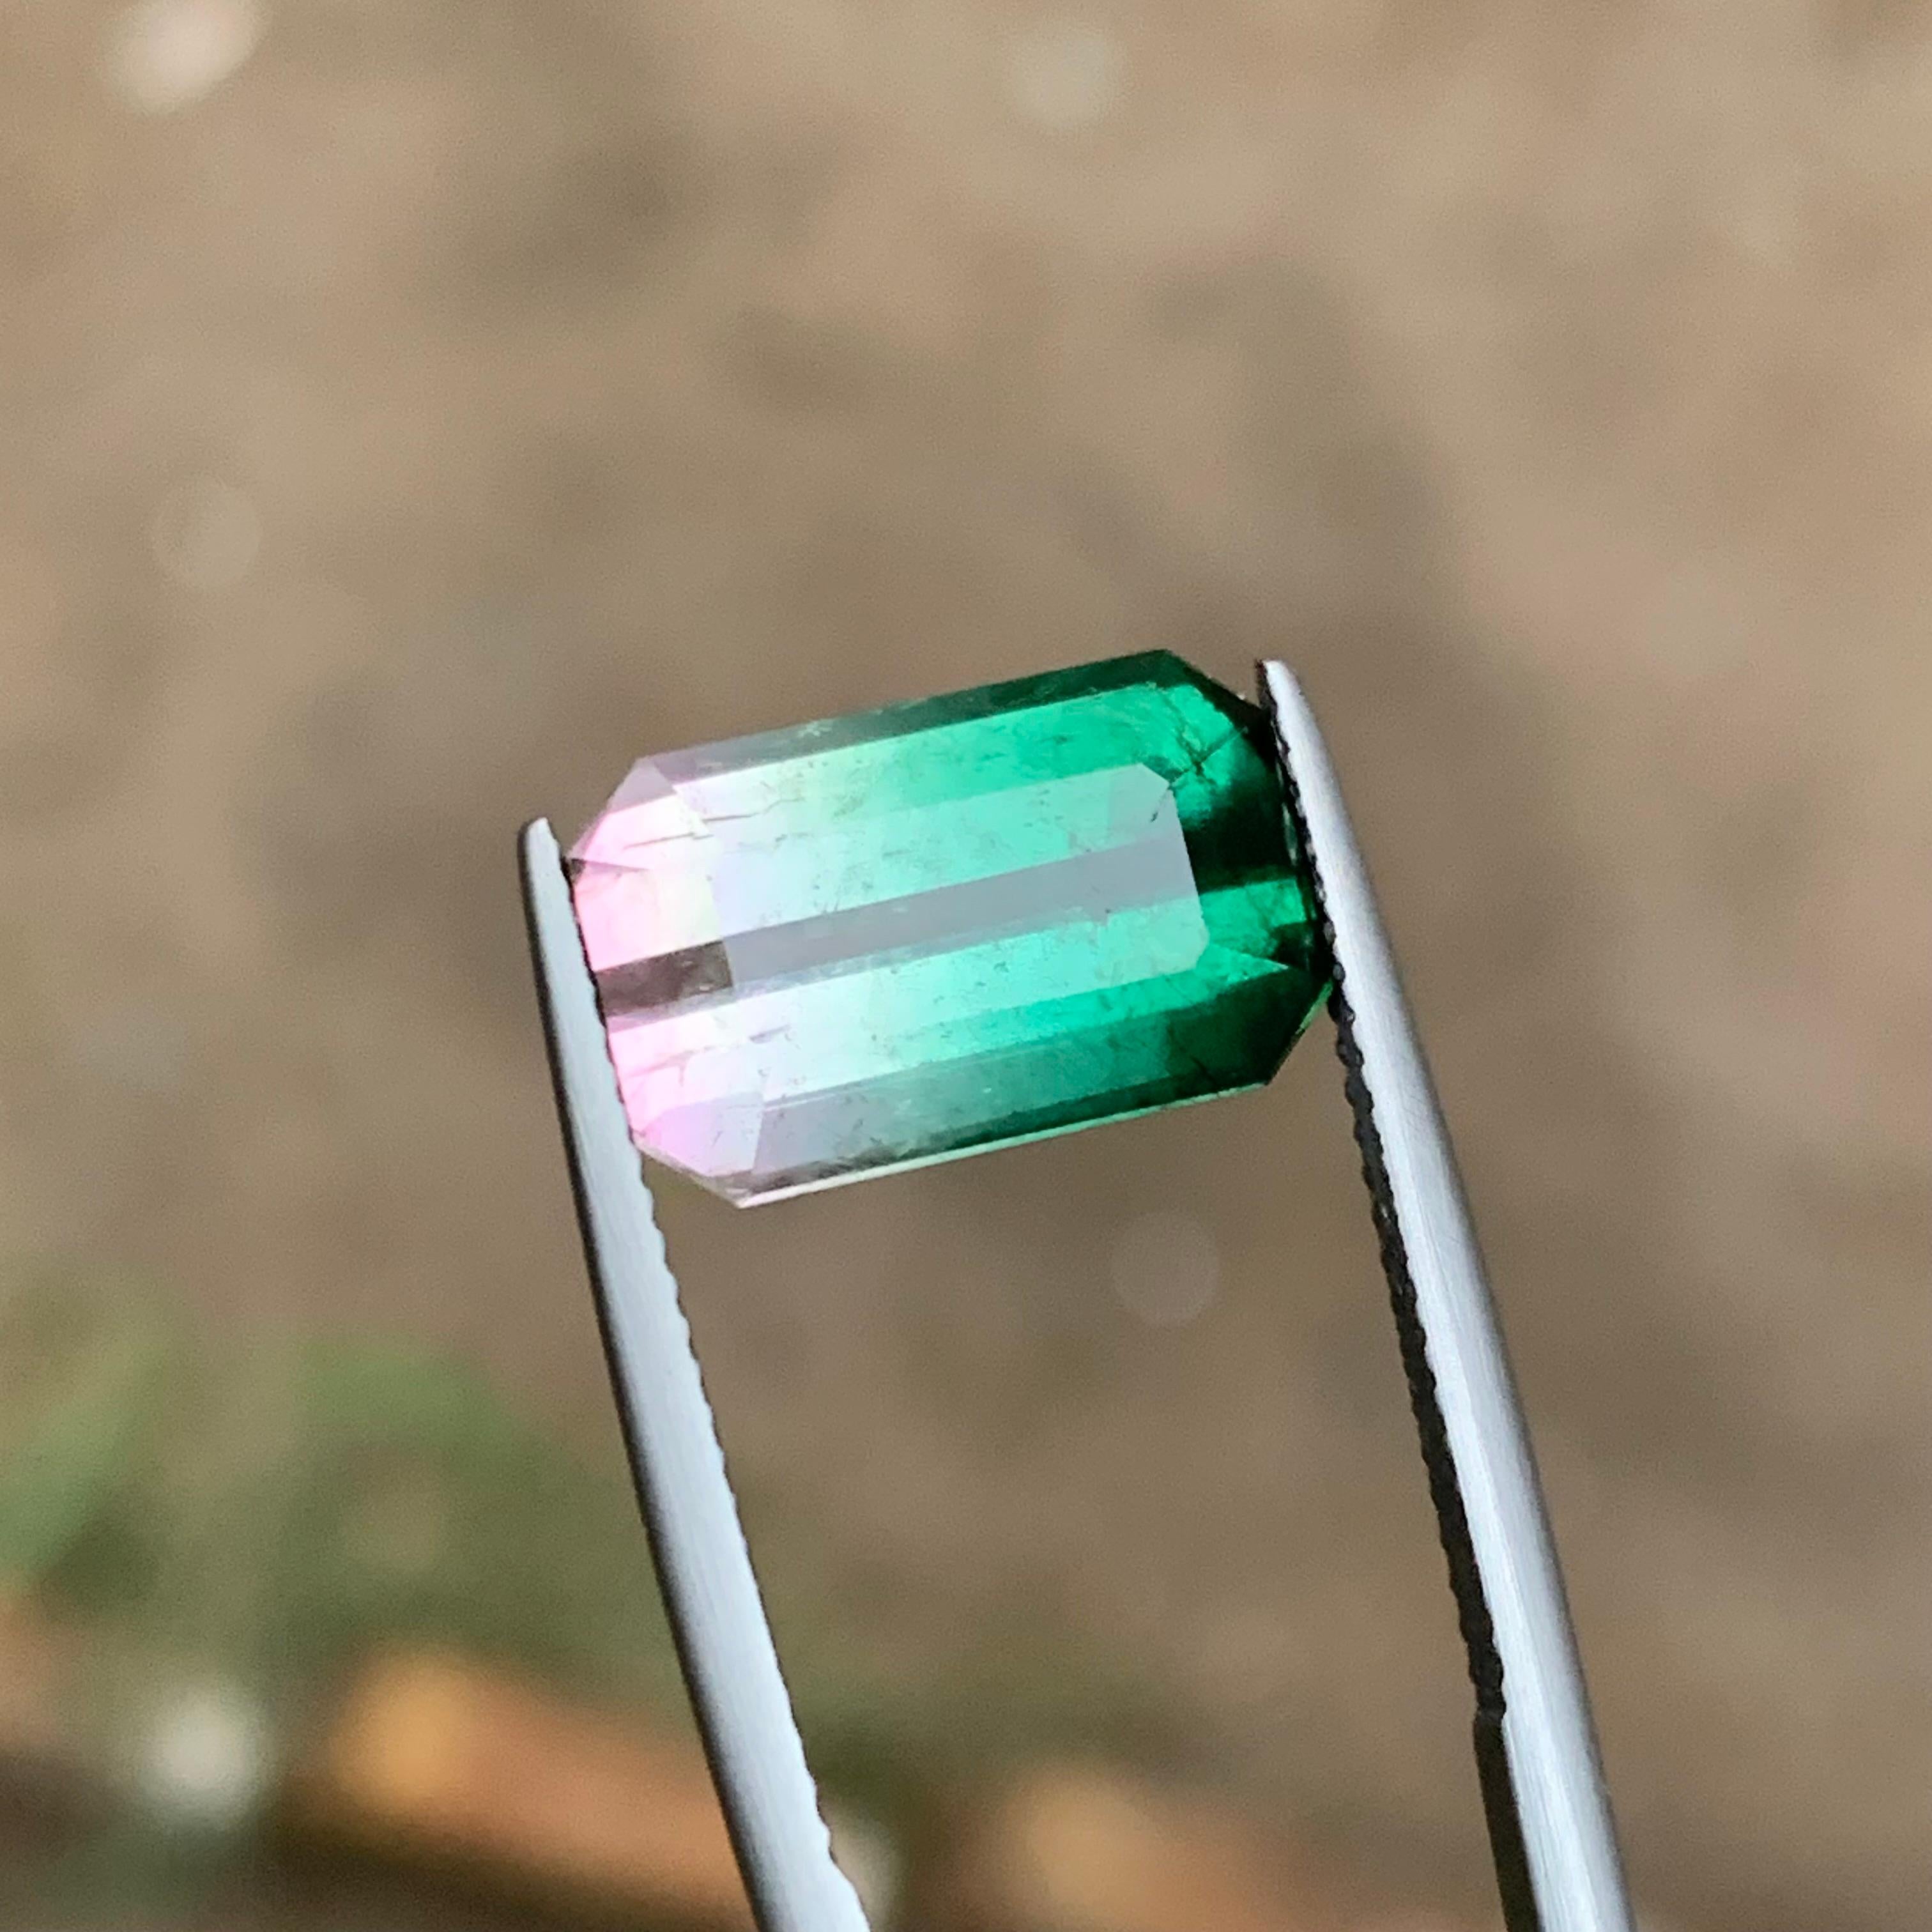 Rare Watermelon Bicolor Bluish Green & Pink Tourmaline Gemstone 7.30 Ct for Ring For Sale 4